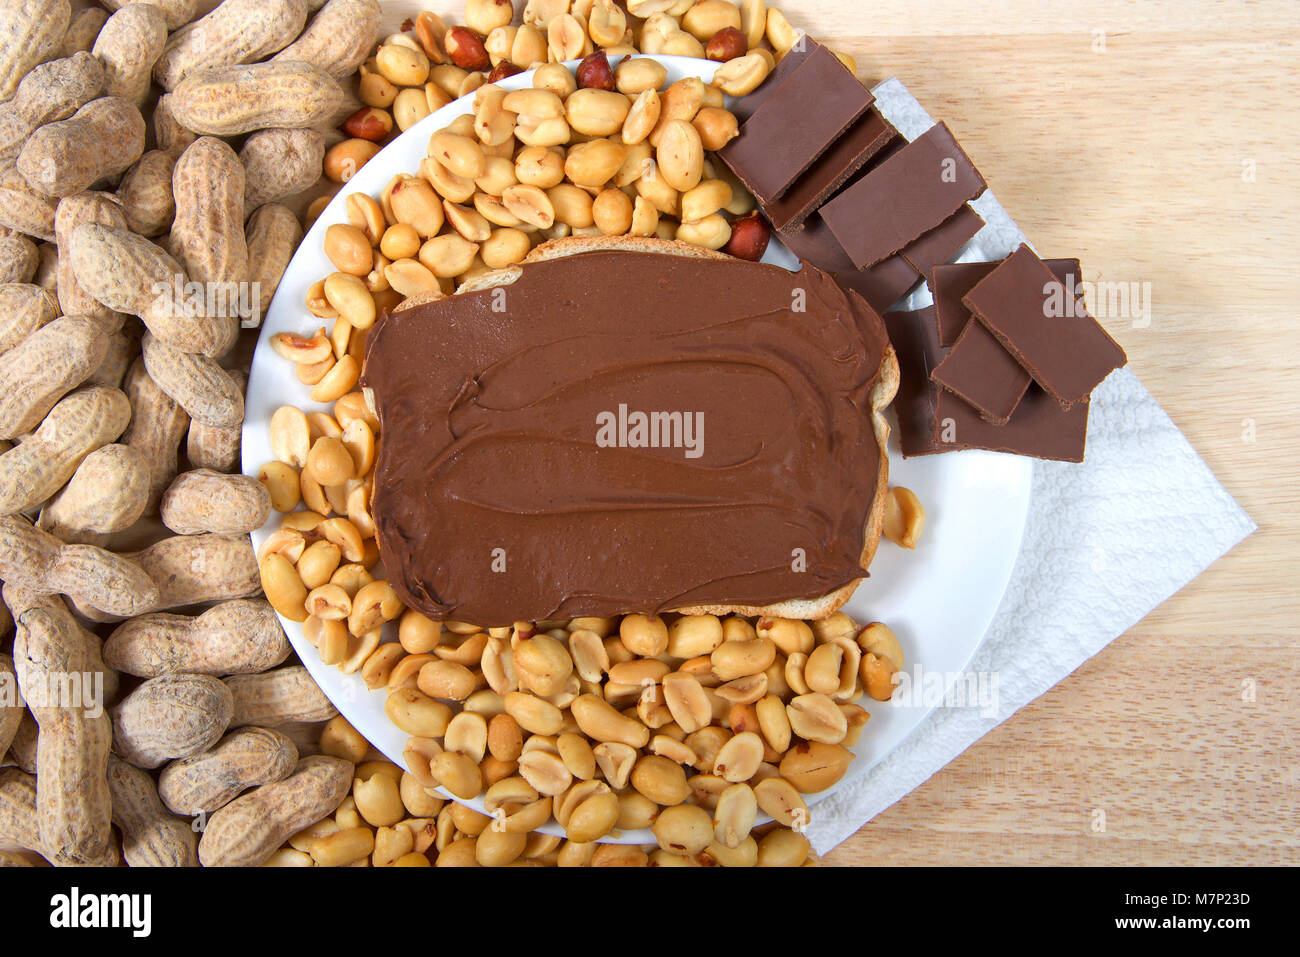 Chocolate peanutbutter spread on bread, open face sandwich on plate with pieces of chocolate, shelled peanuts and whole in shell peanuts on wood table Stock Photo